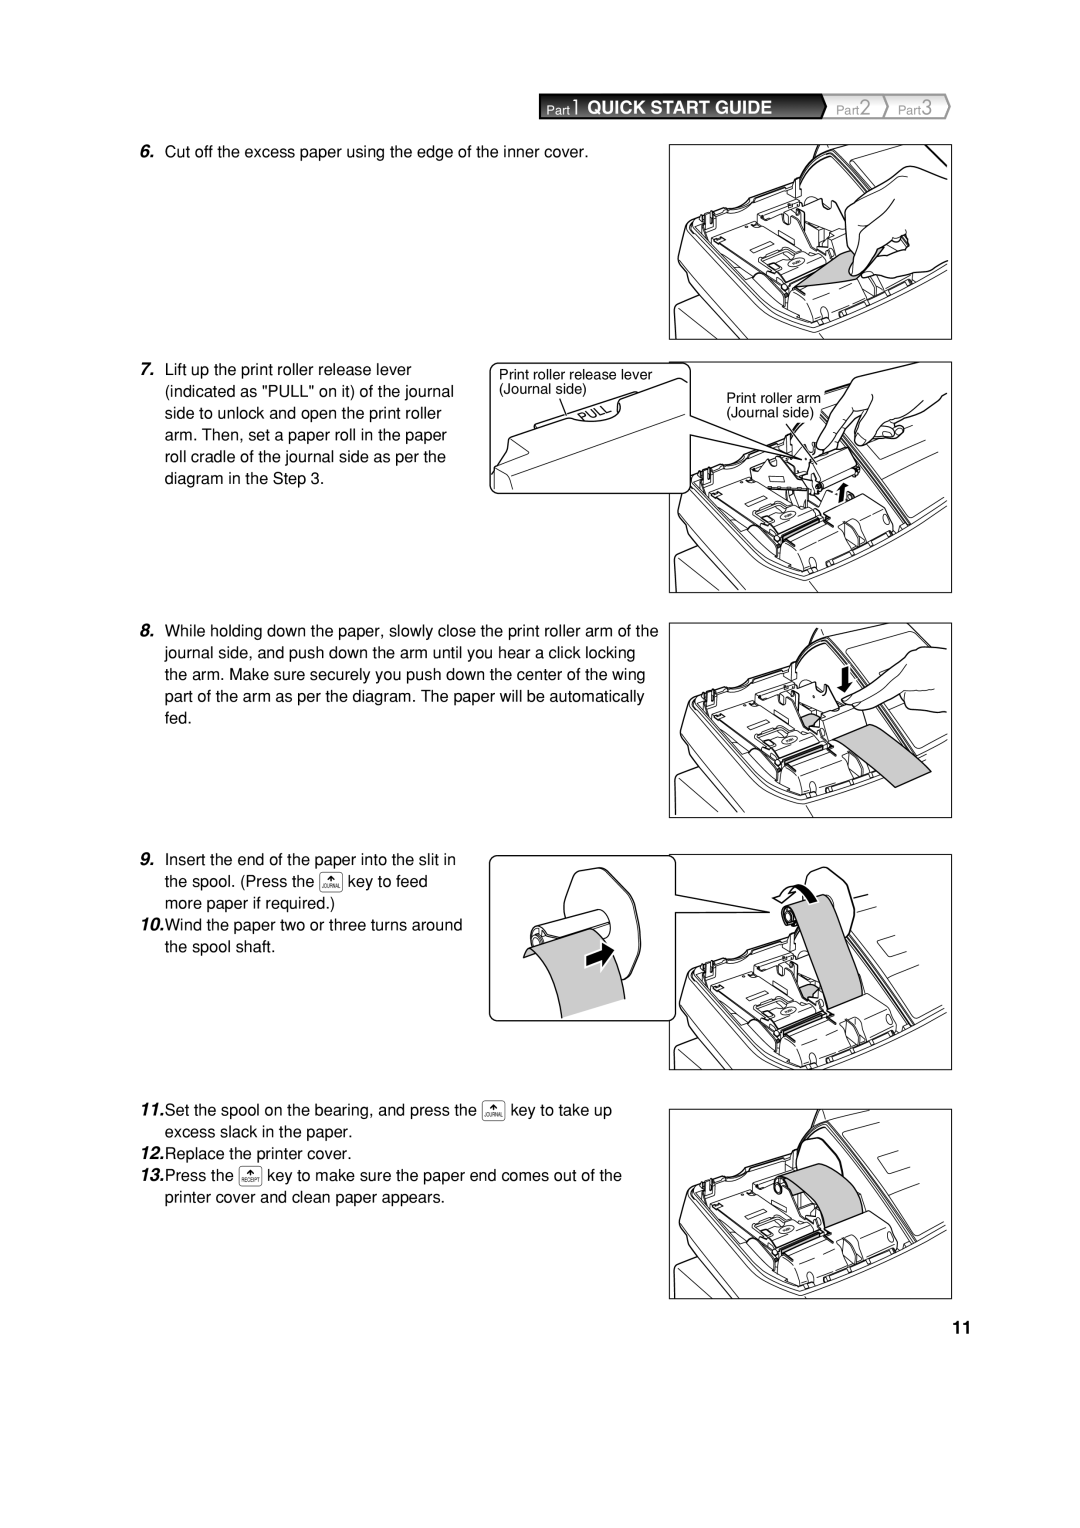 Sharp XE-A303 instruction manual Part1 QUICK START GUIDE, Cut off the excess paper using the edge of the inner cover 